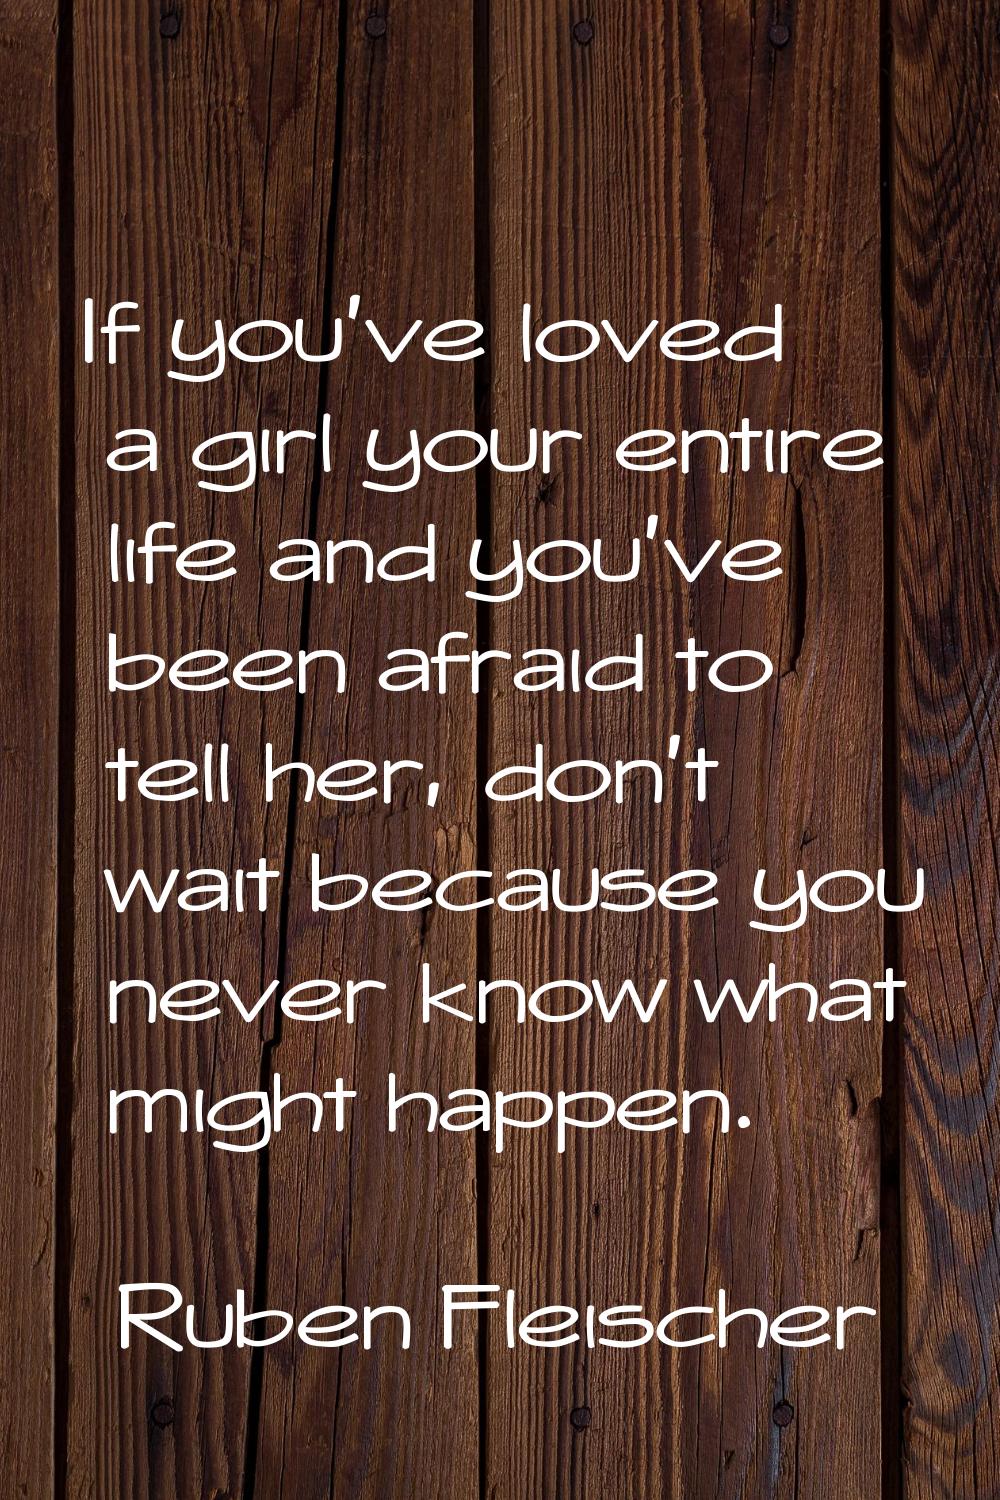 If you've loved a girl your entire life and you've been afraid to tell her, don't wait because you 